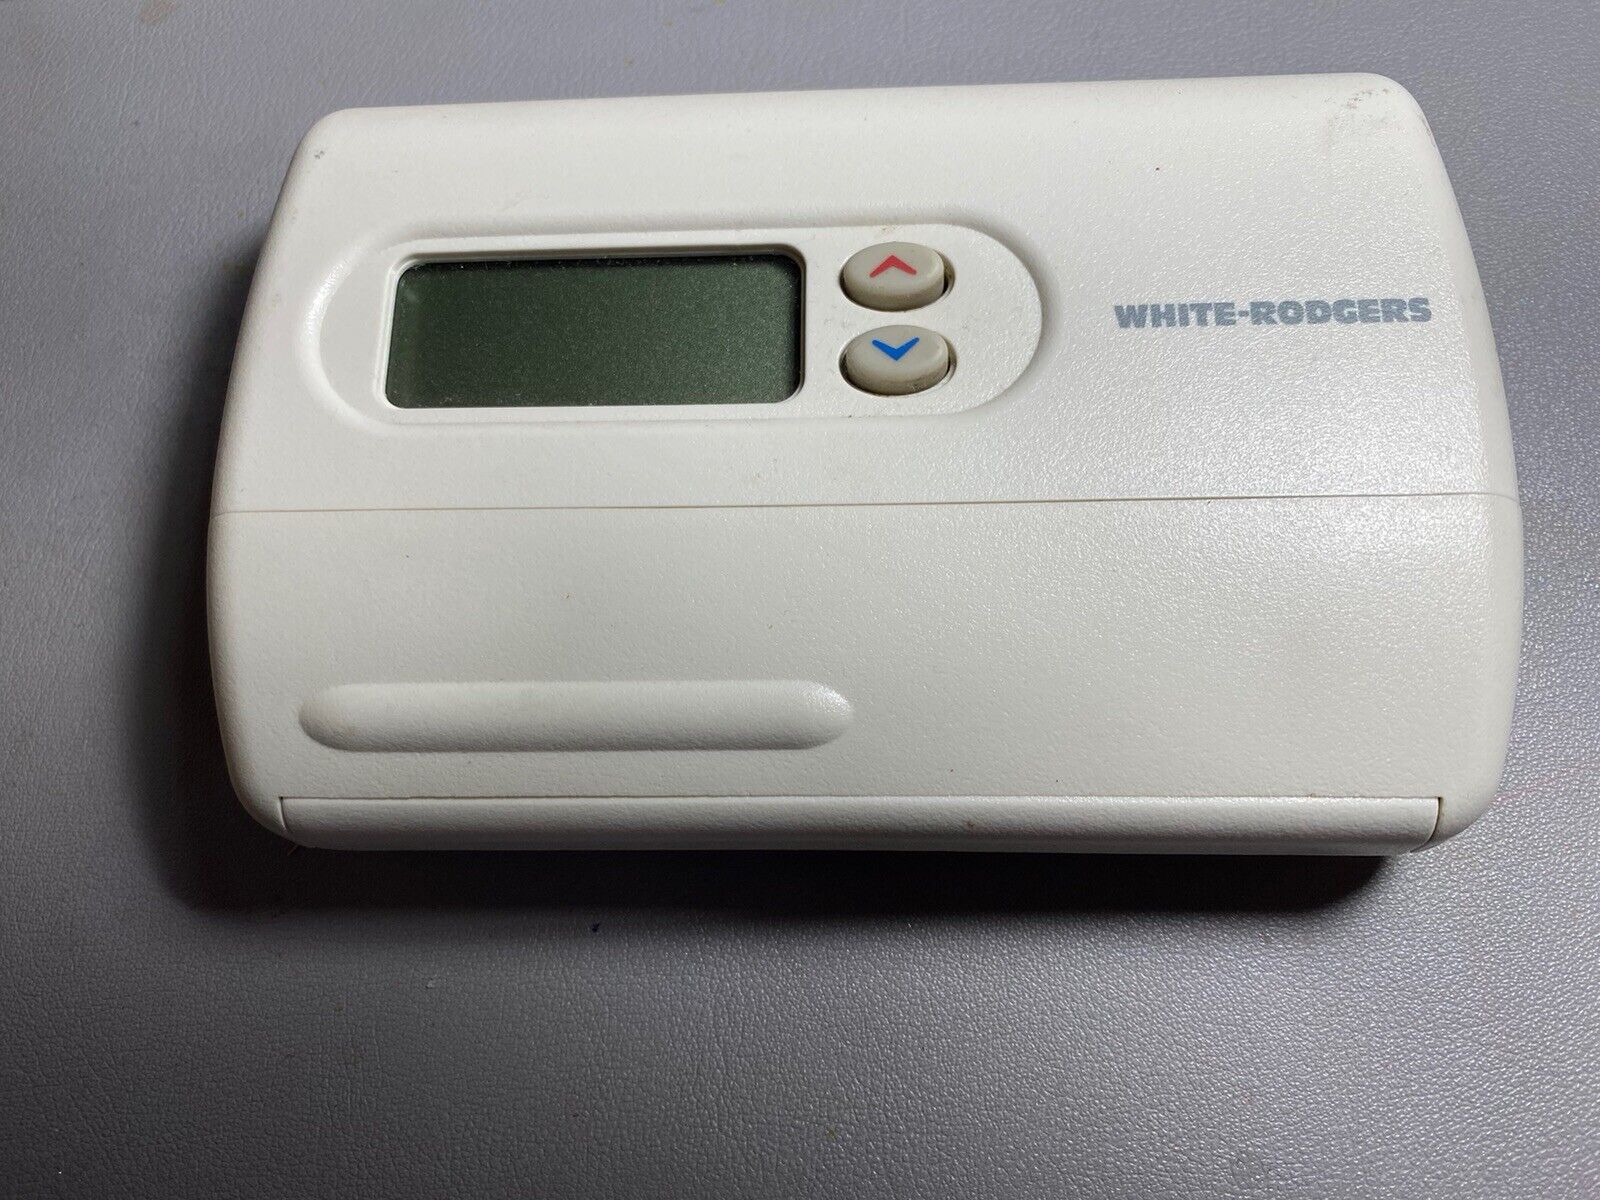 White-Rodgers Programmable Thermostat 1F81-261 (Pre-owned)